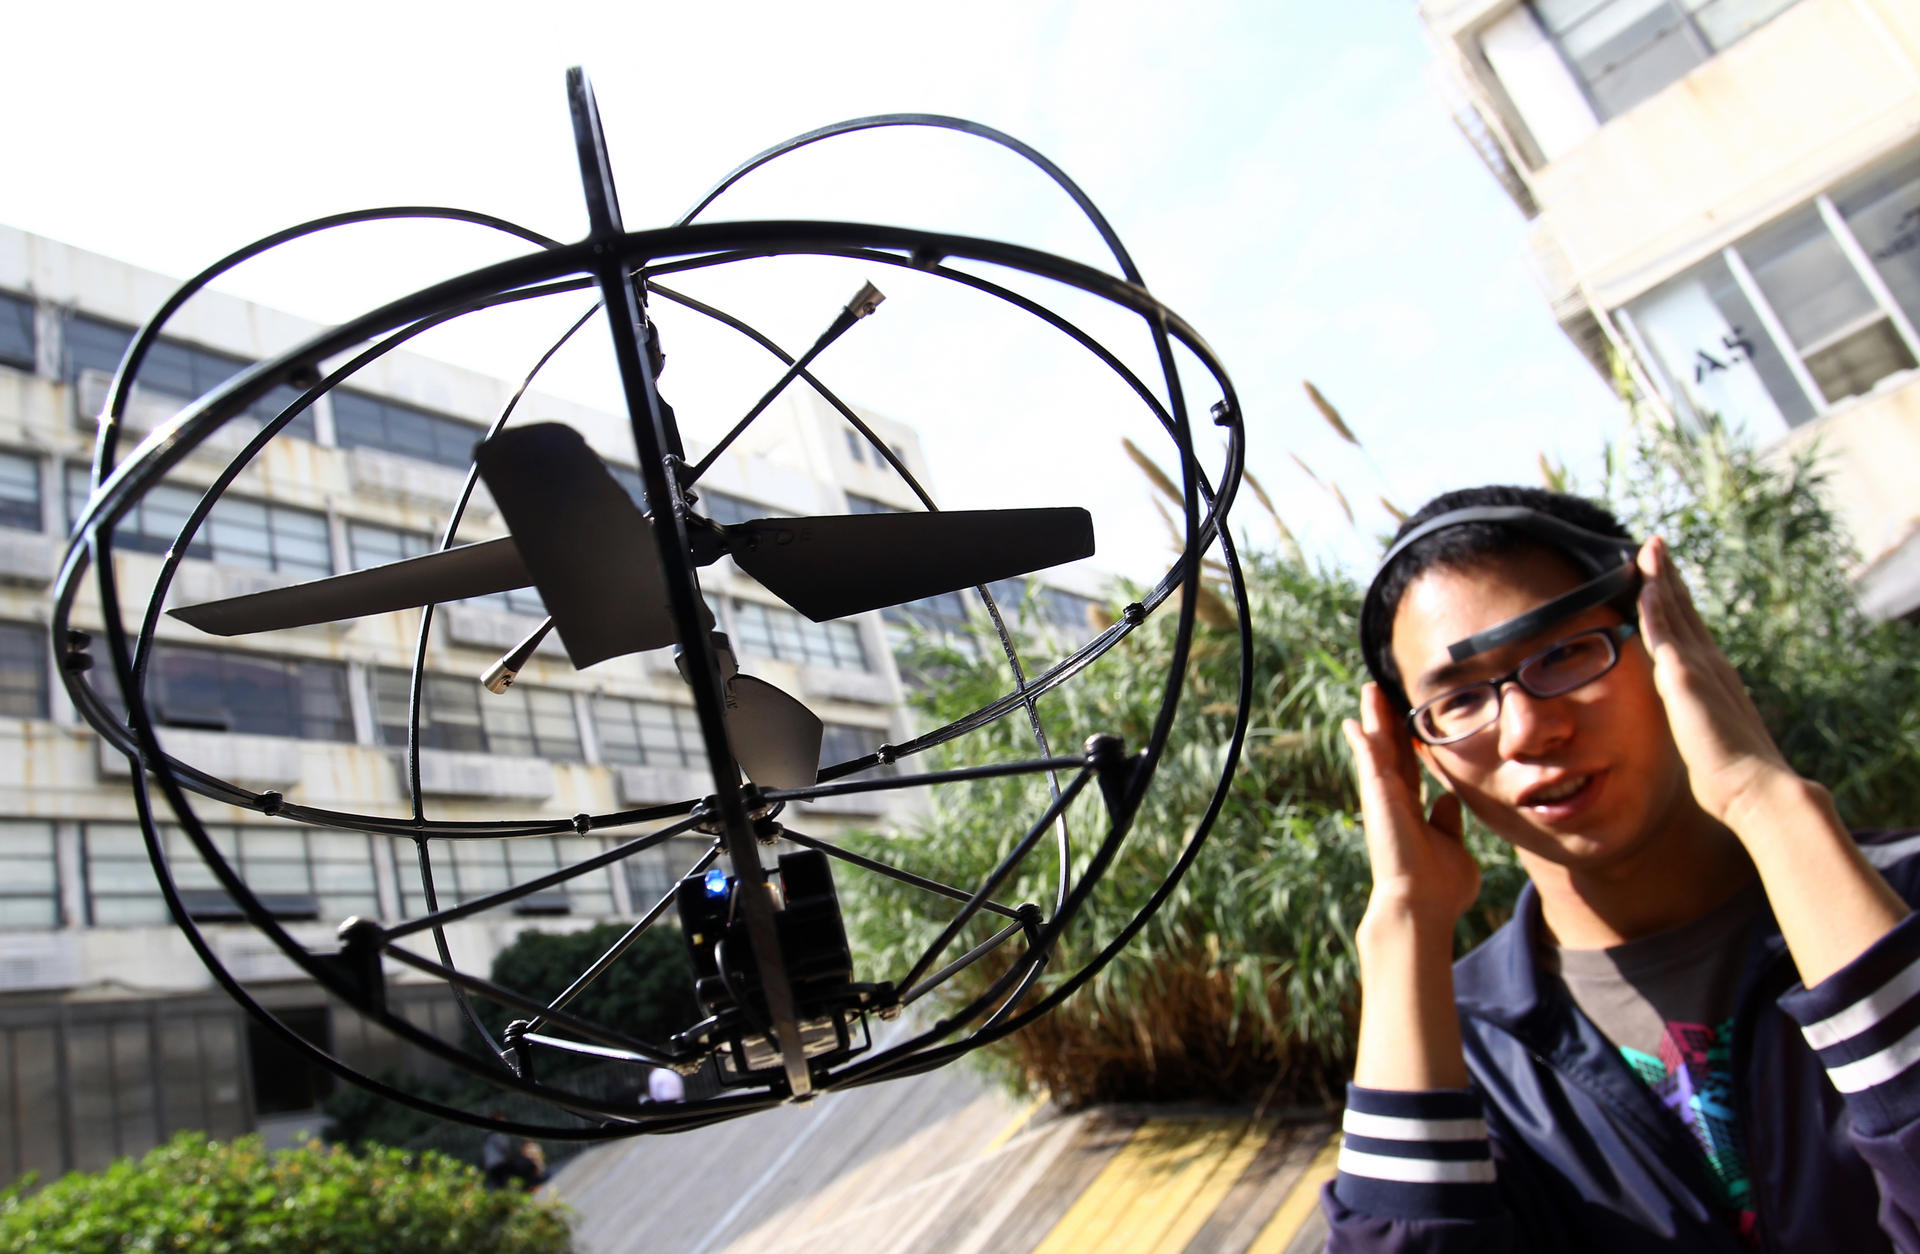 Sam Chen steers a "brain-controlled" Puzzlebox Orbit helicopter outside the Chaihuo maker space, a Shenzhen workshop for technology enthusiasts. Photo: Dickson Lee